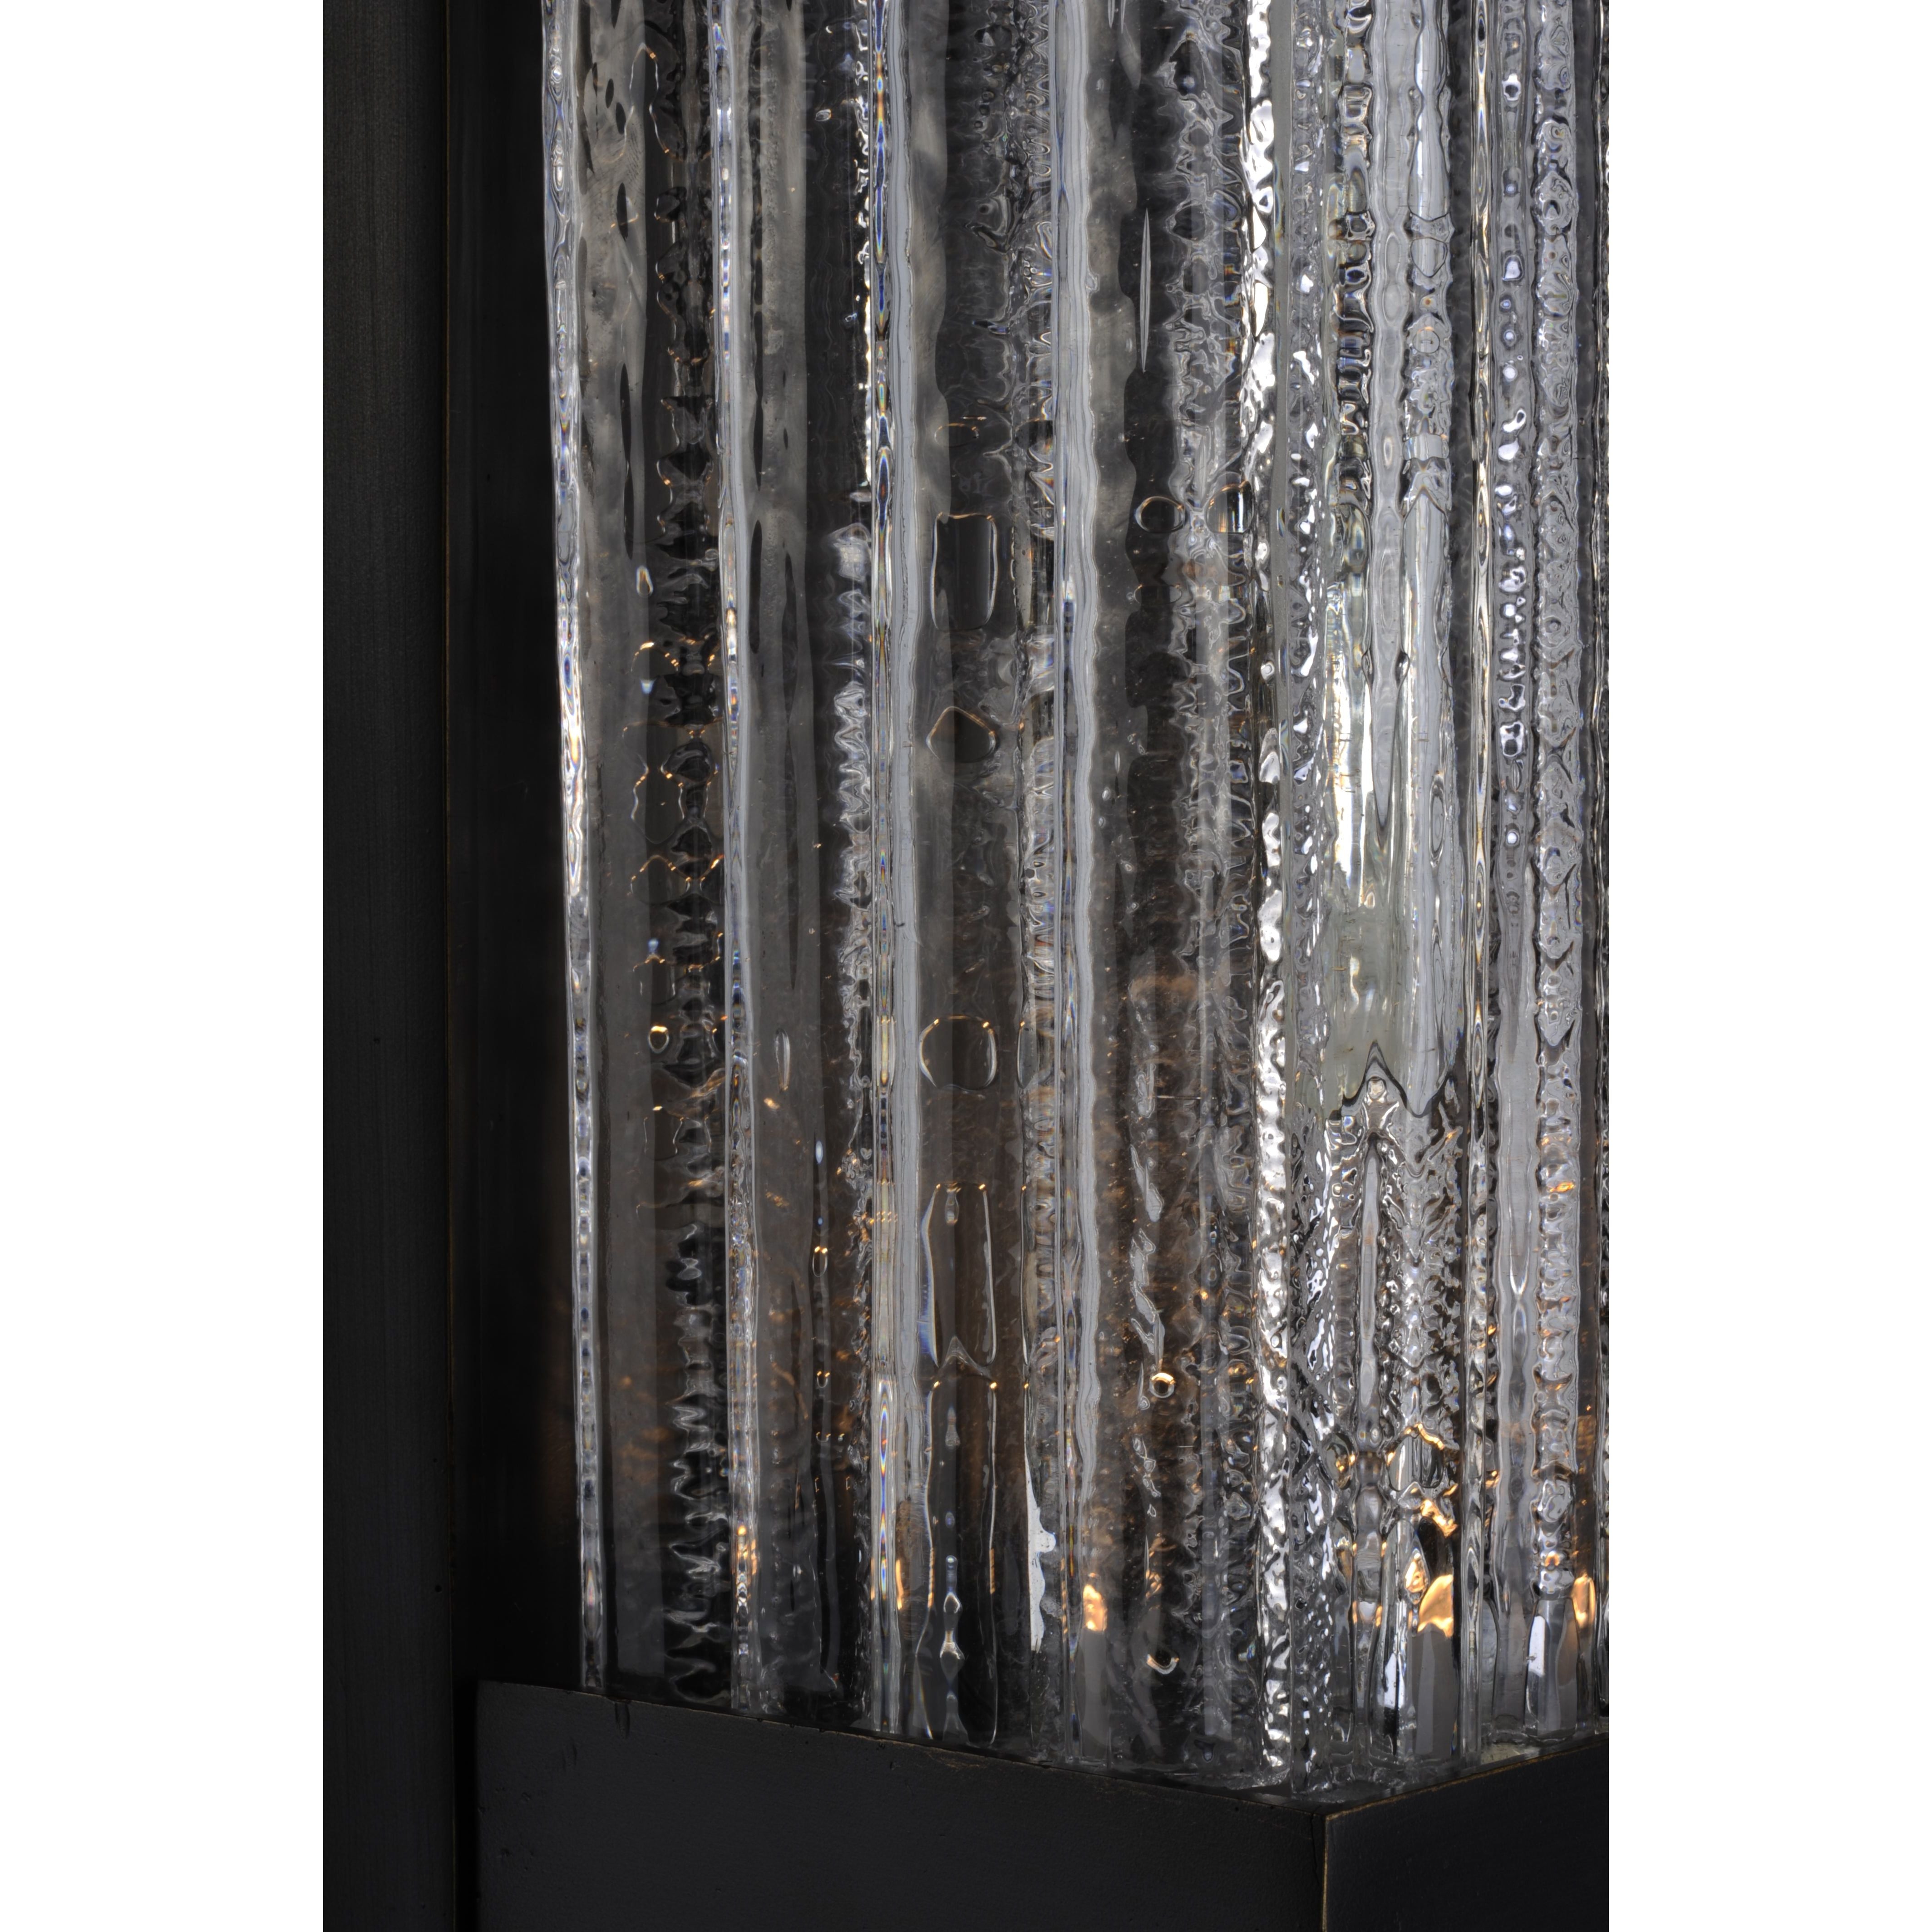 Encore VX LED Outdoor Wall Sconce